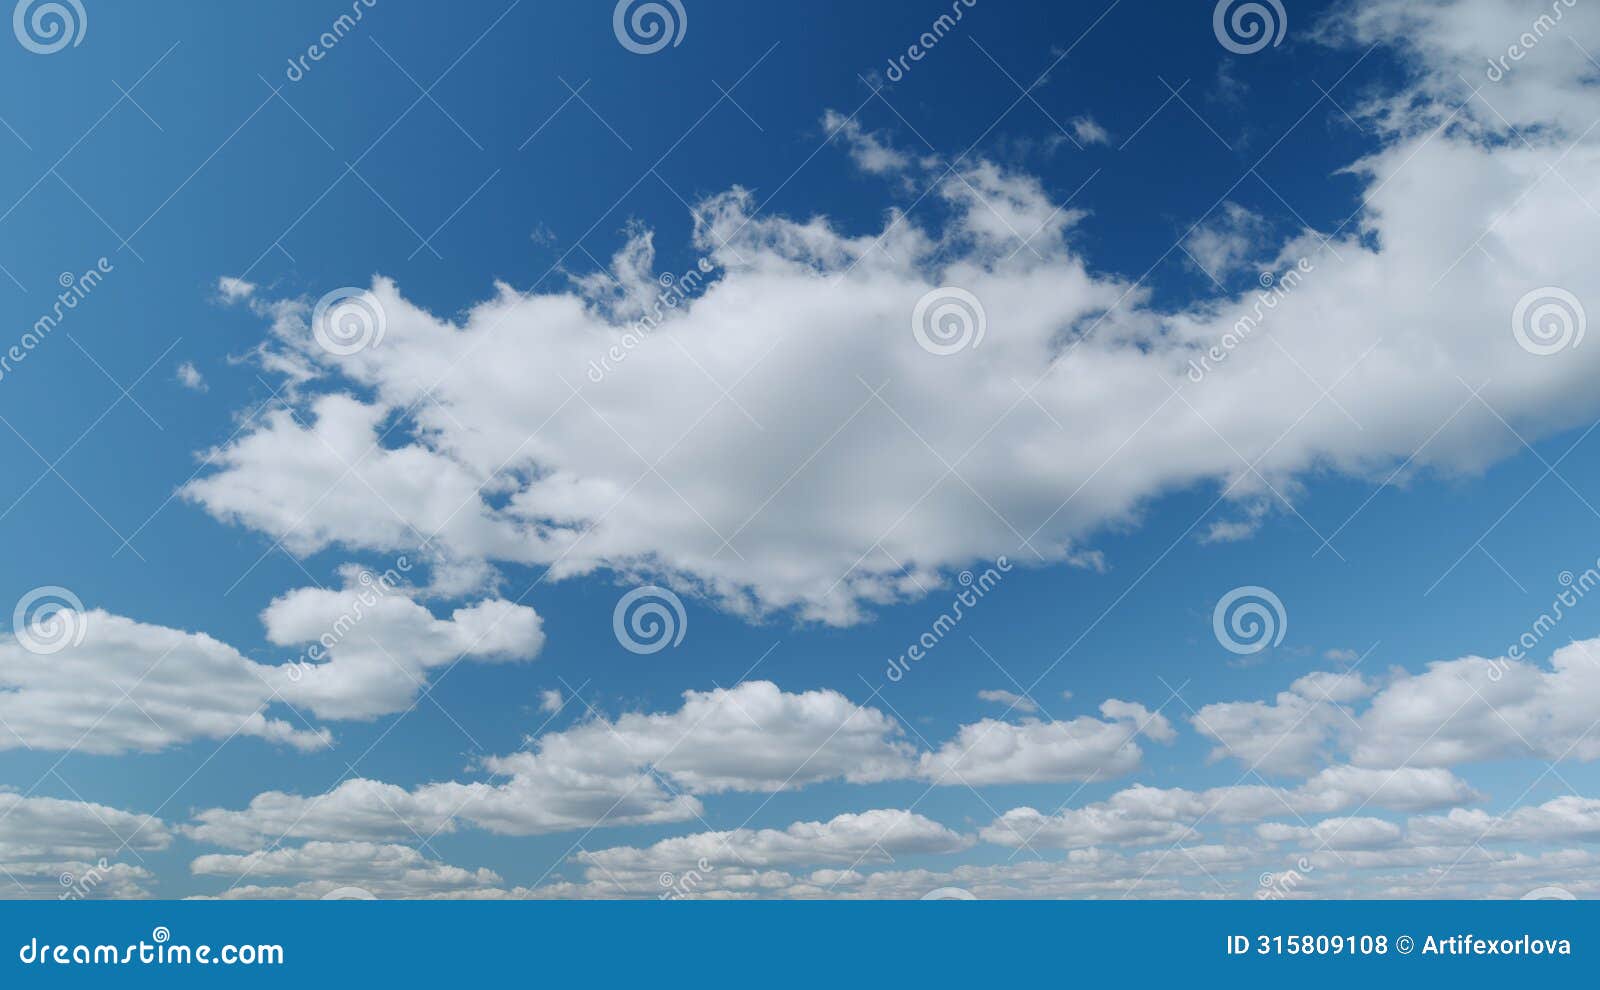 tropical summer sunlight. blue sky with stratus and stratocumulus clouds. fluffy layered clouds sky atmosphere